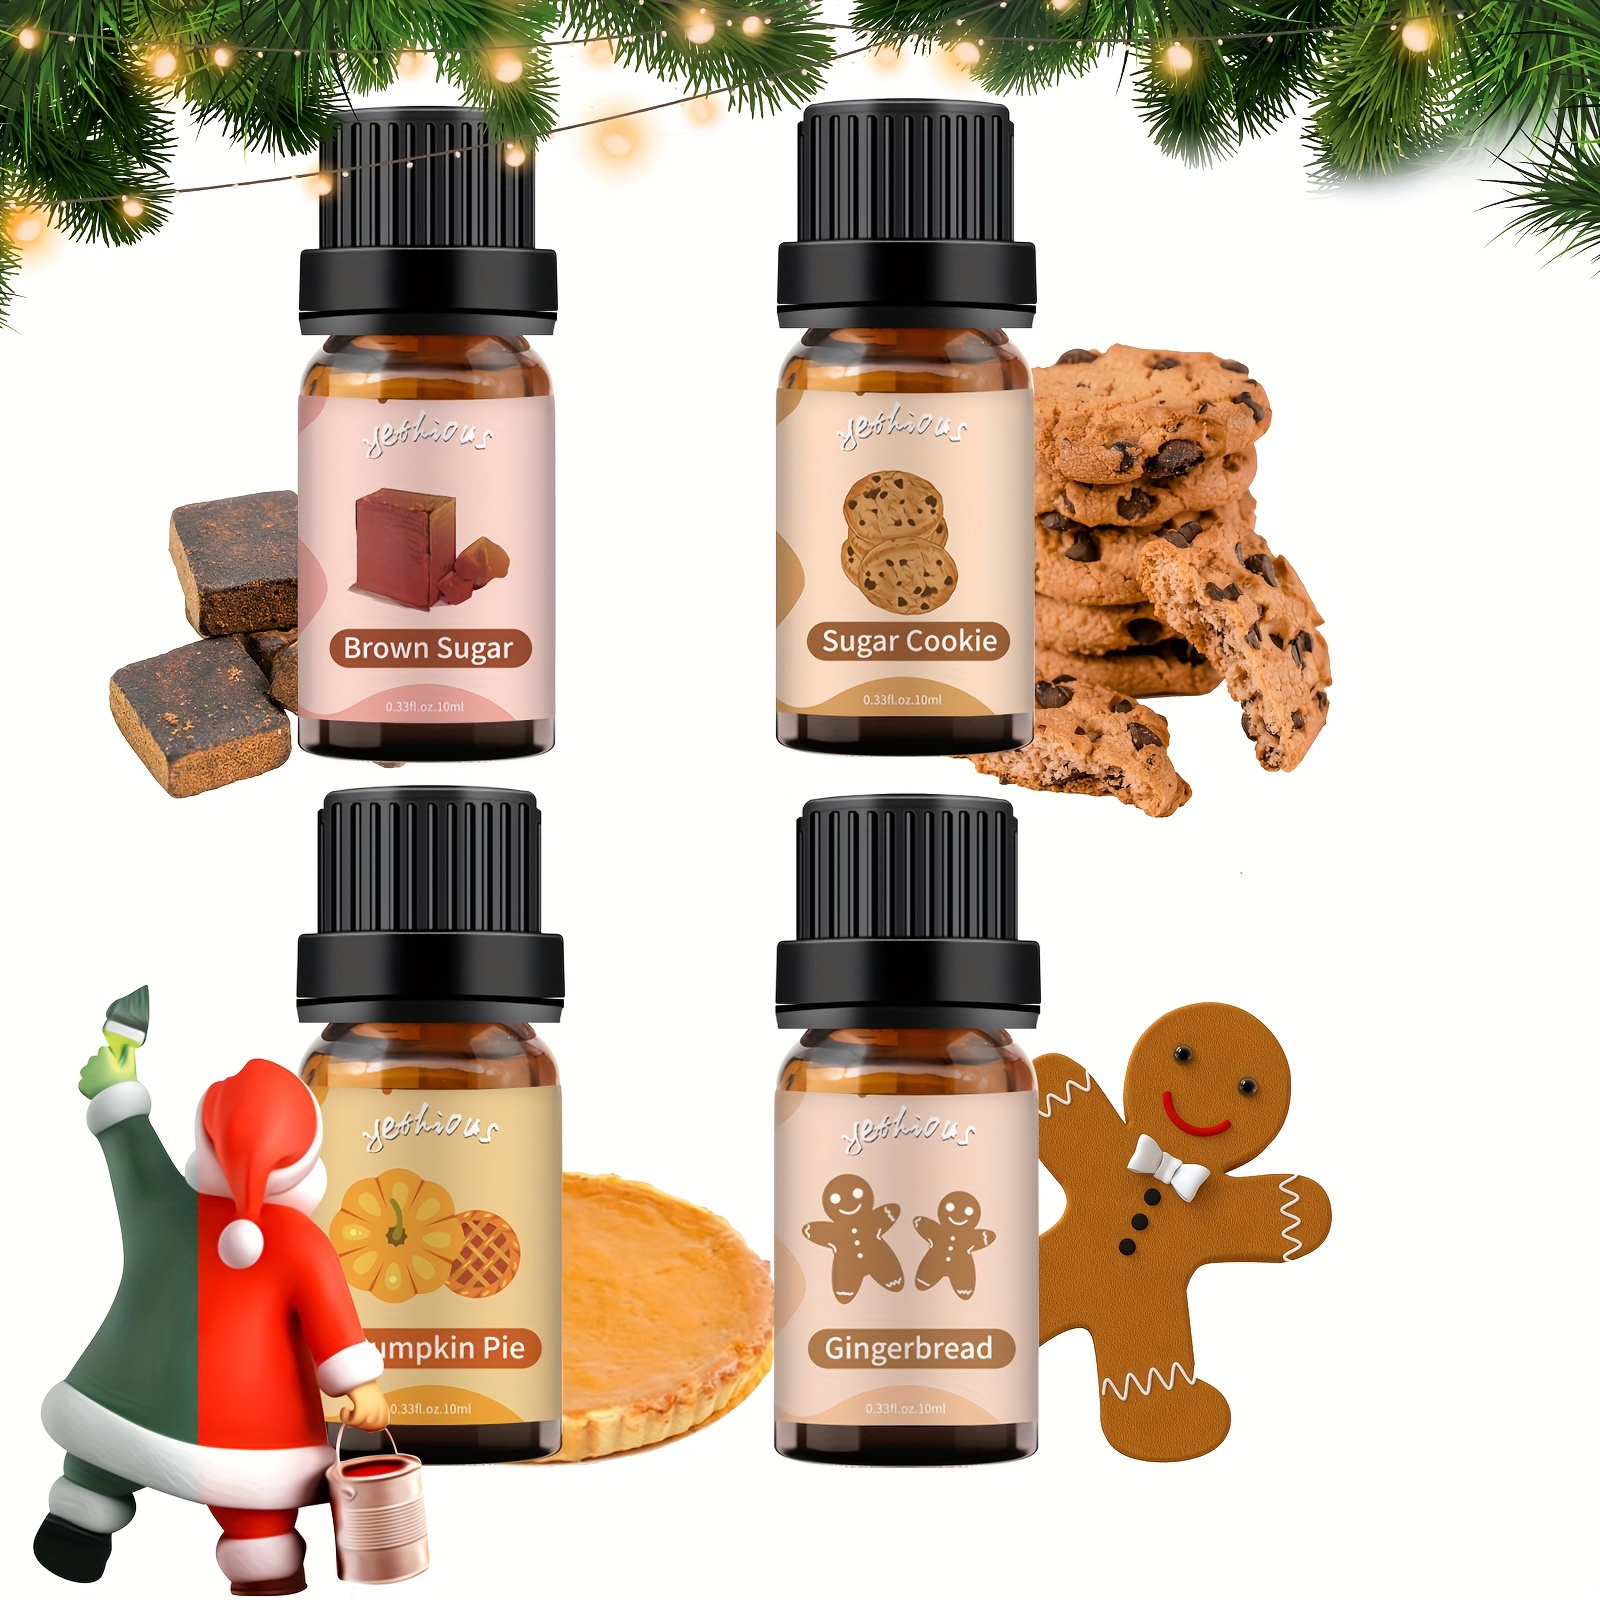  yethious Premium Grade Sugar Cookie Fragrance Oil - Sugar  Cookie Scented Oils for Diffusers, Candle Making, Soap Scents, Aroma Beads,  Bath Bombs, Perfume Gift : Health & Household